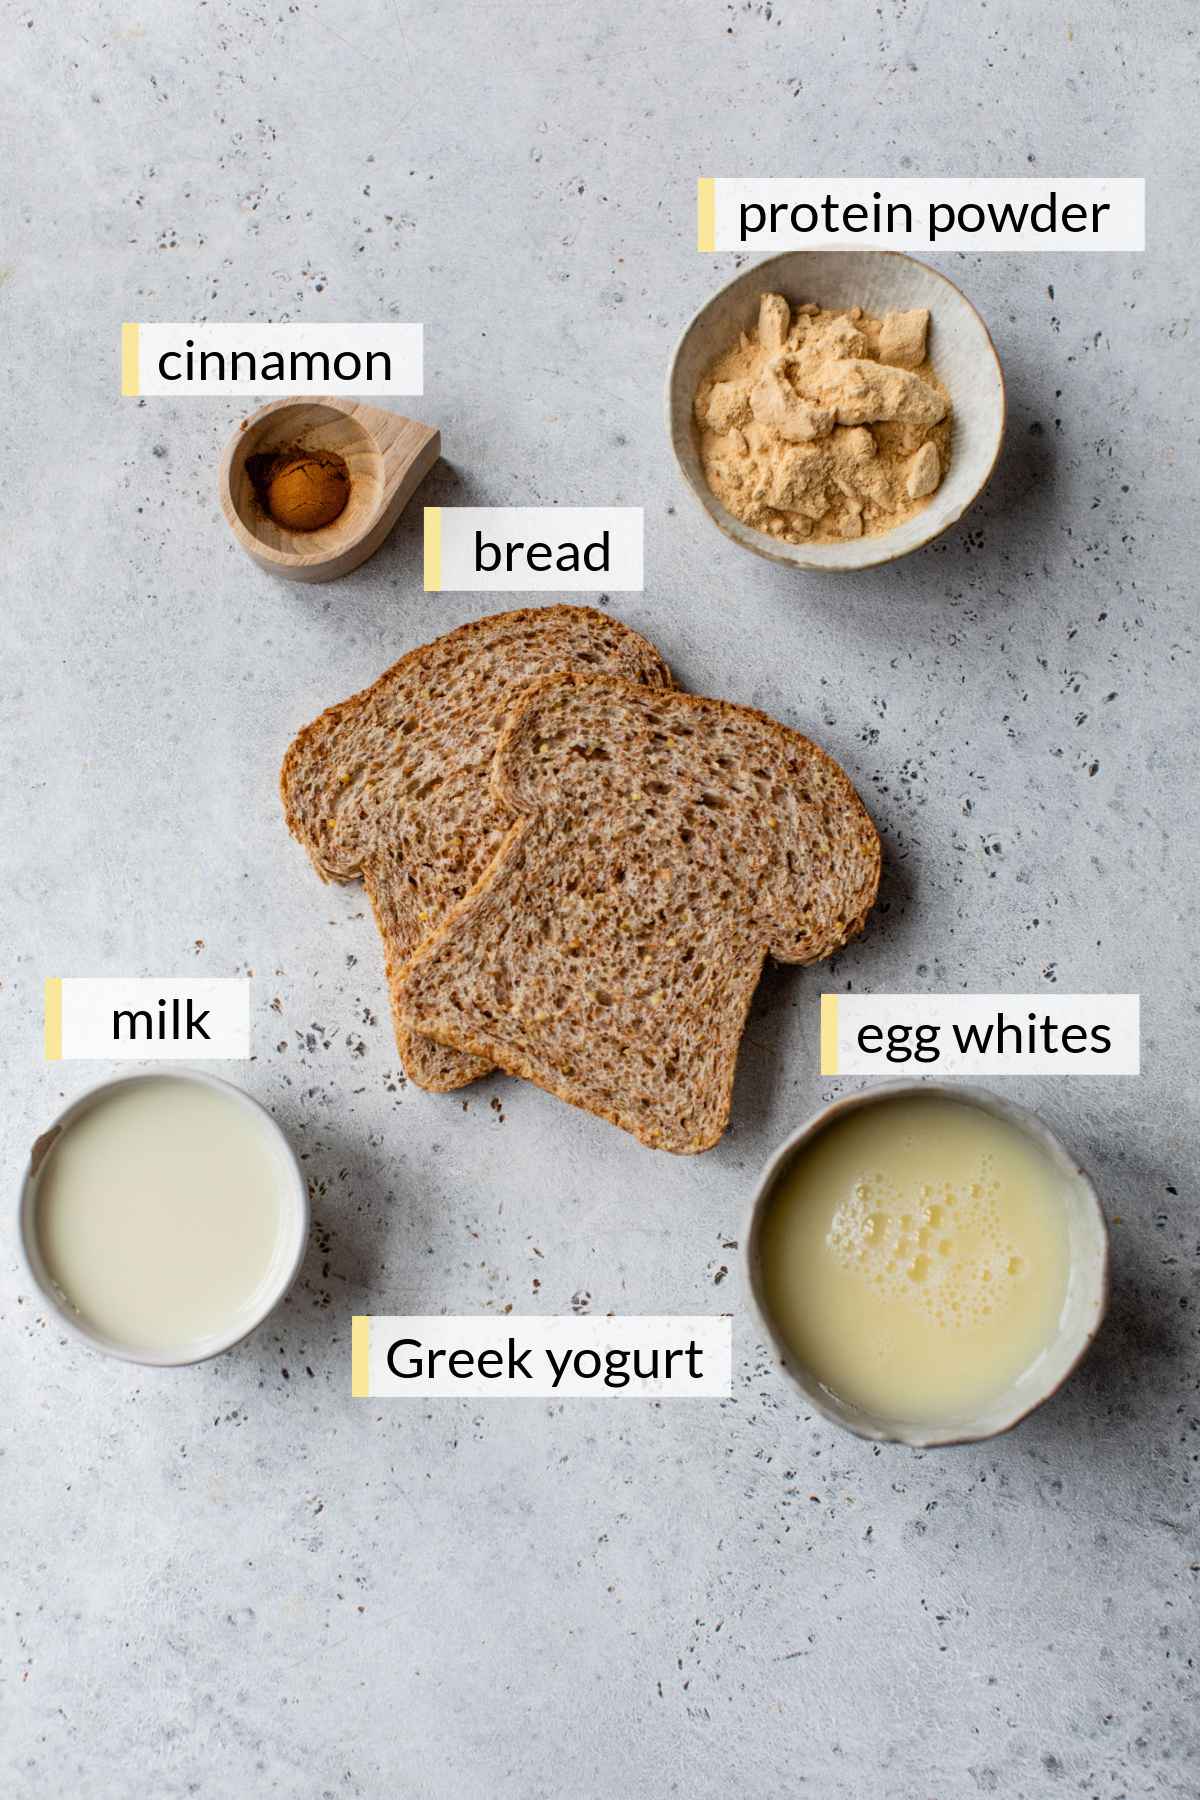 Slices of bread, egg whites, milk, protein powder and cinnamon divided into small portions.